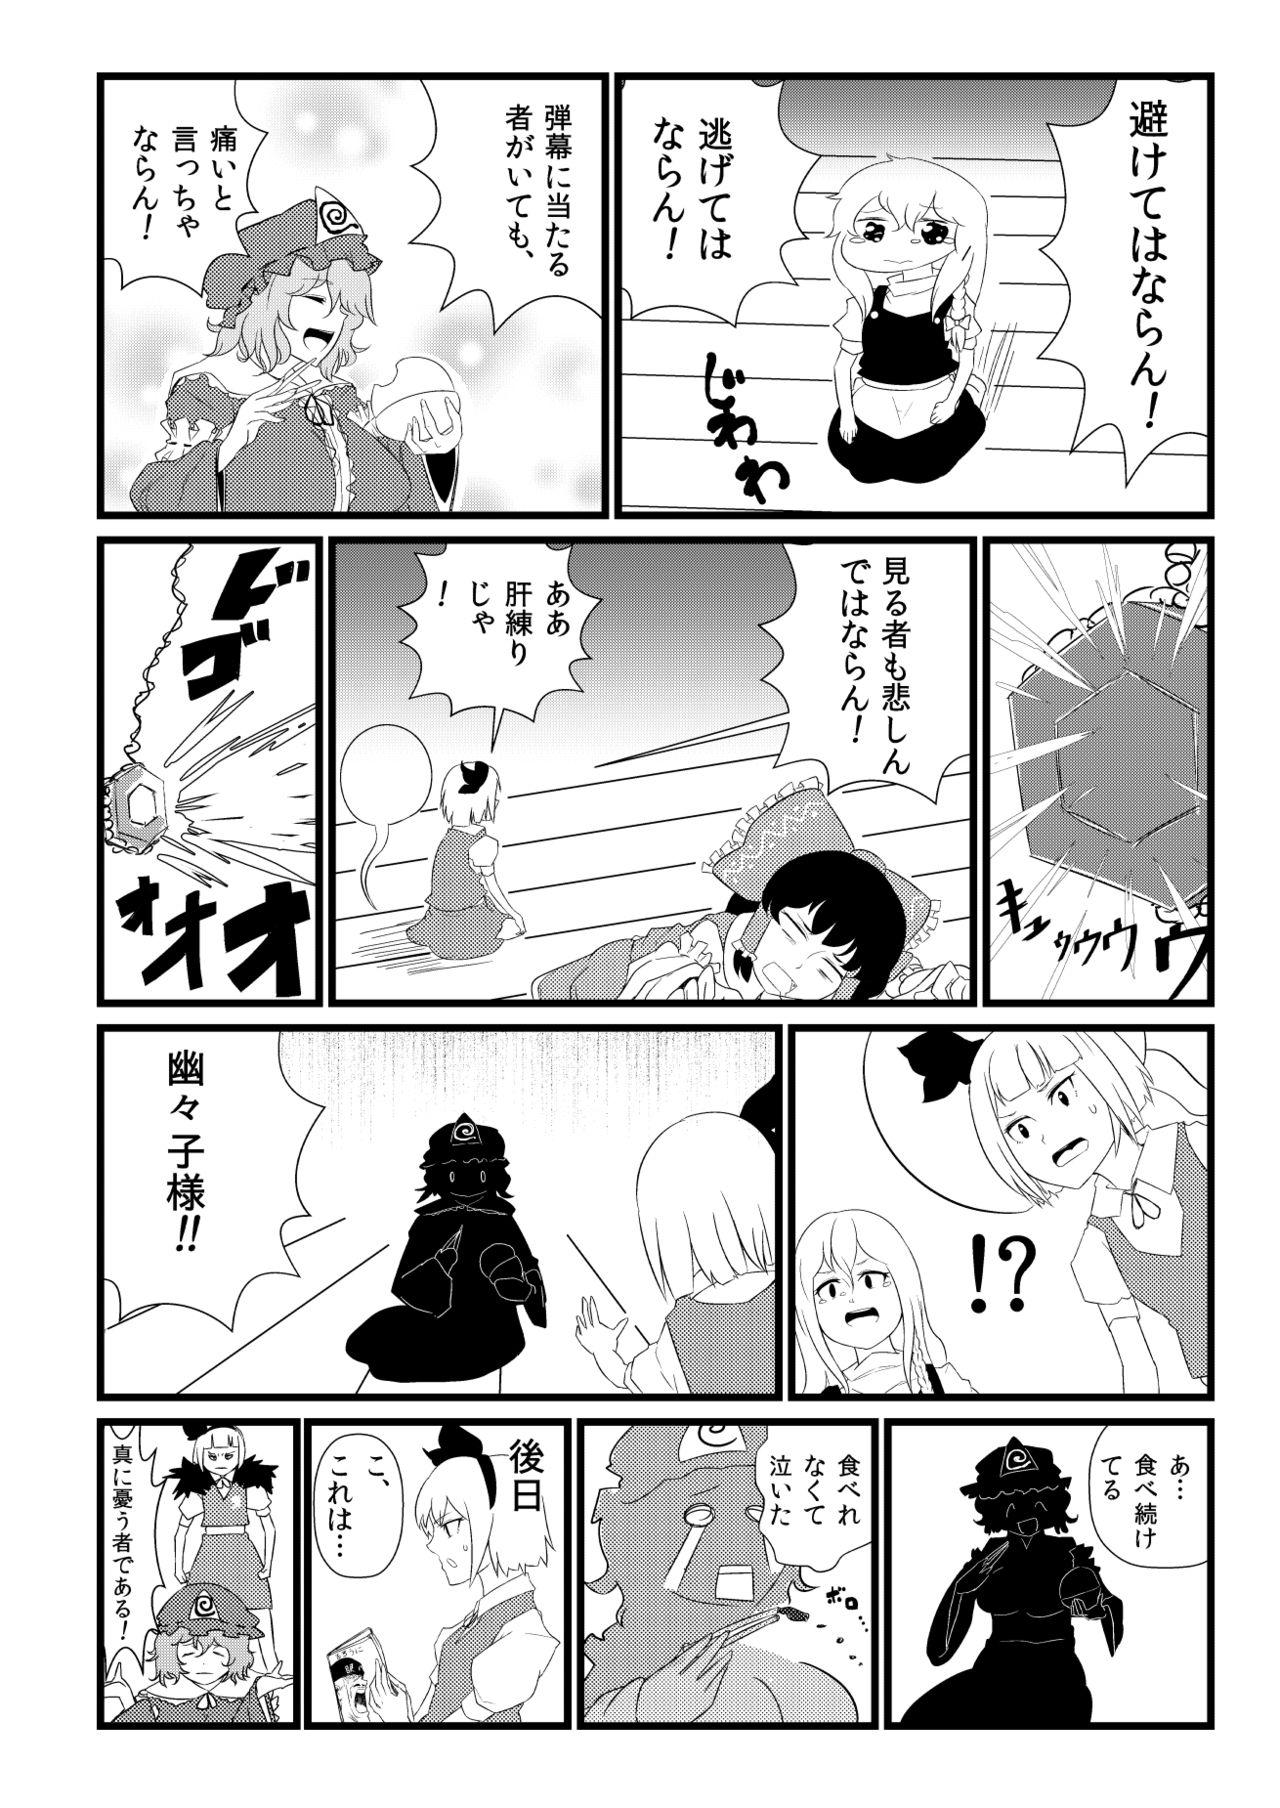 Smalltits 東方板としあき合同誌5 - Touhou project Spain - Page 4